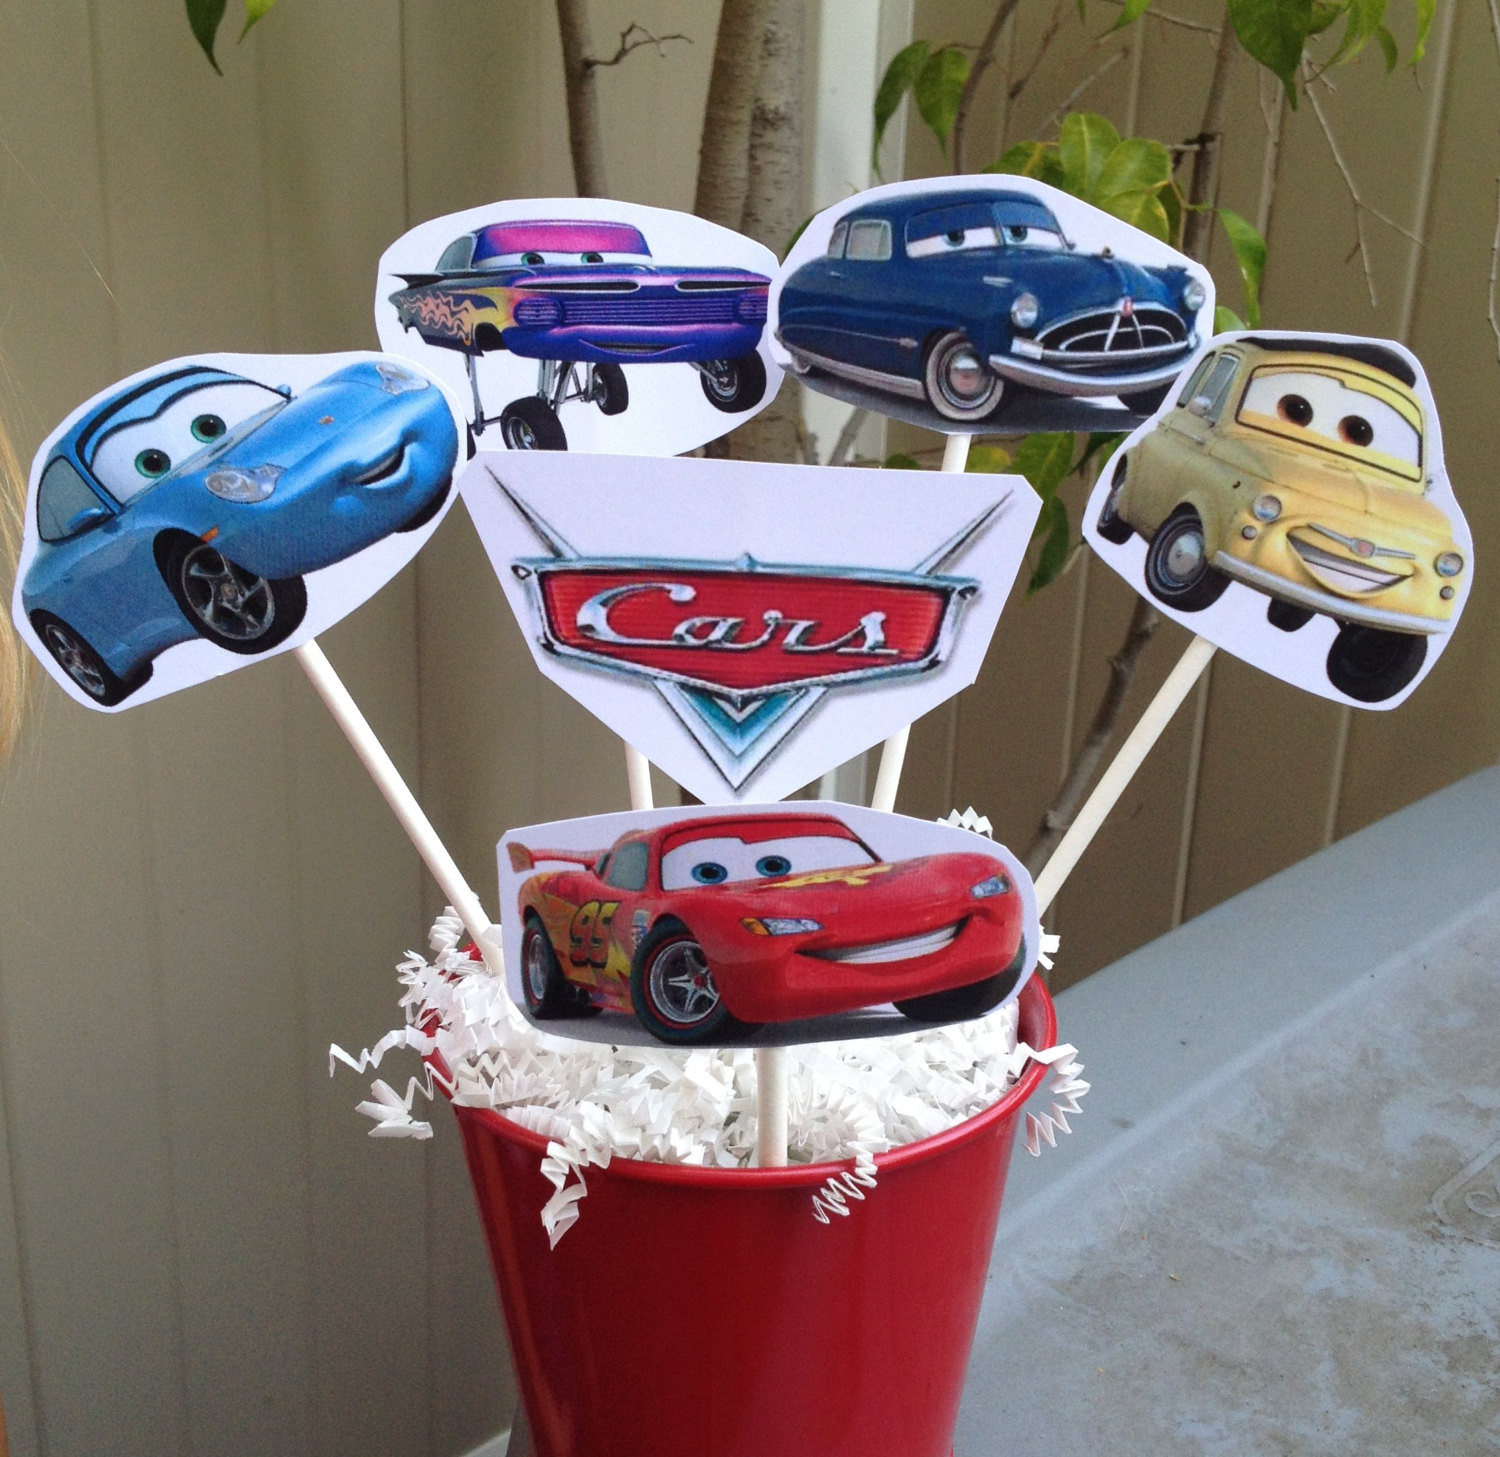 Birthday Car Decorations
 1 CARS Centerpiece Disney inspired CARS Party Decorations